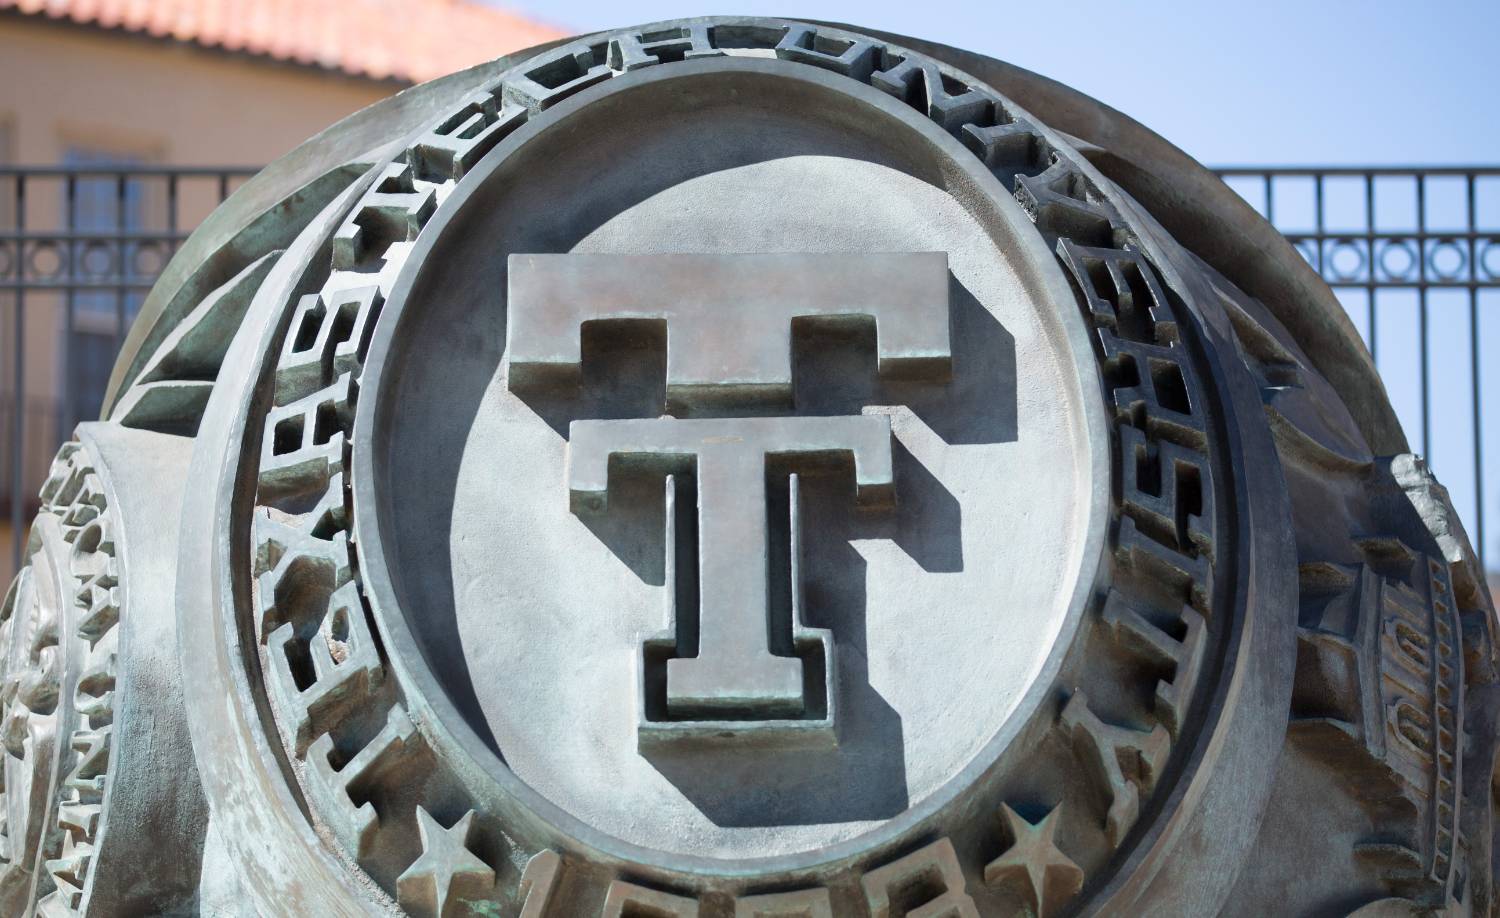 Faculty and staff recognized with TTU Length of Service Awards